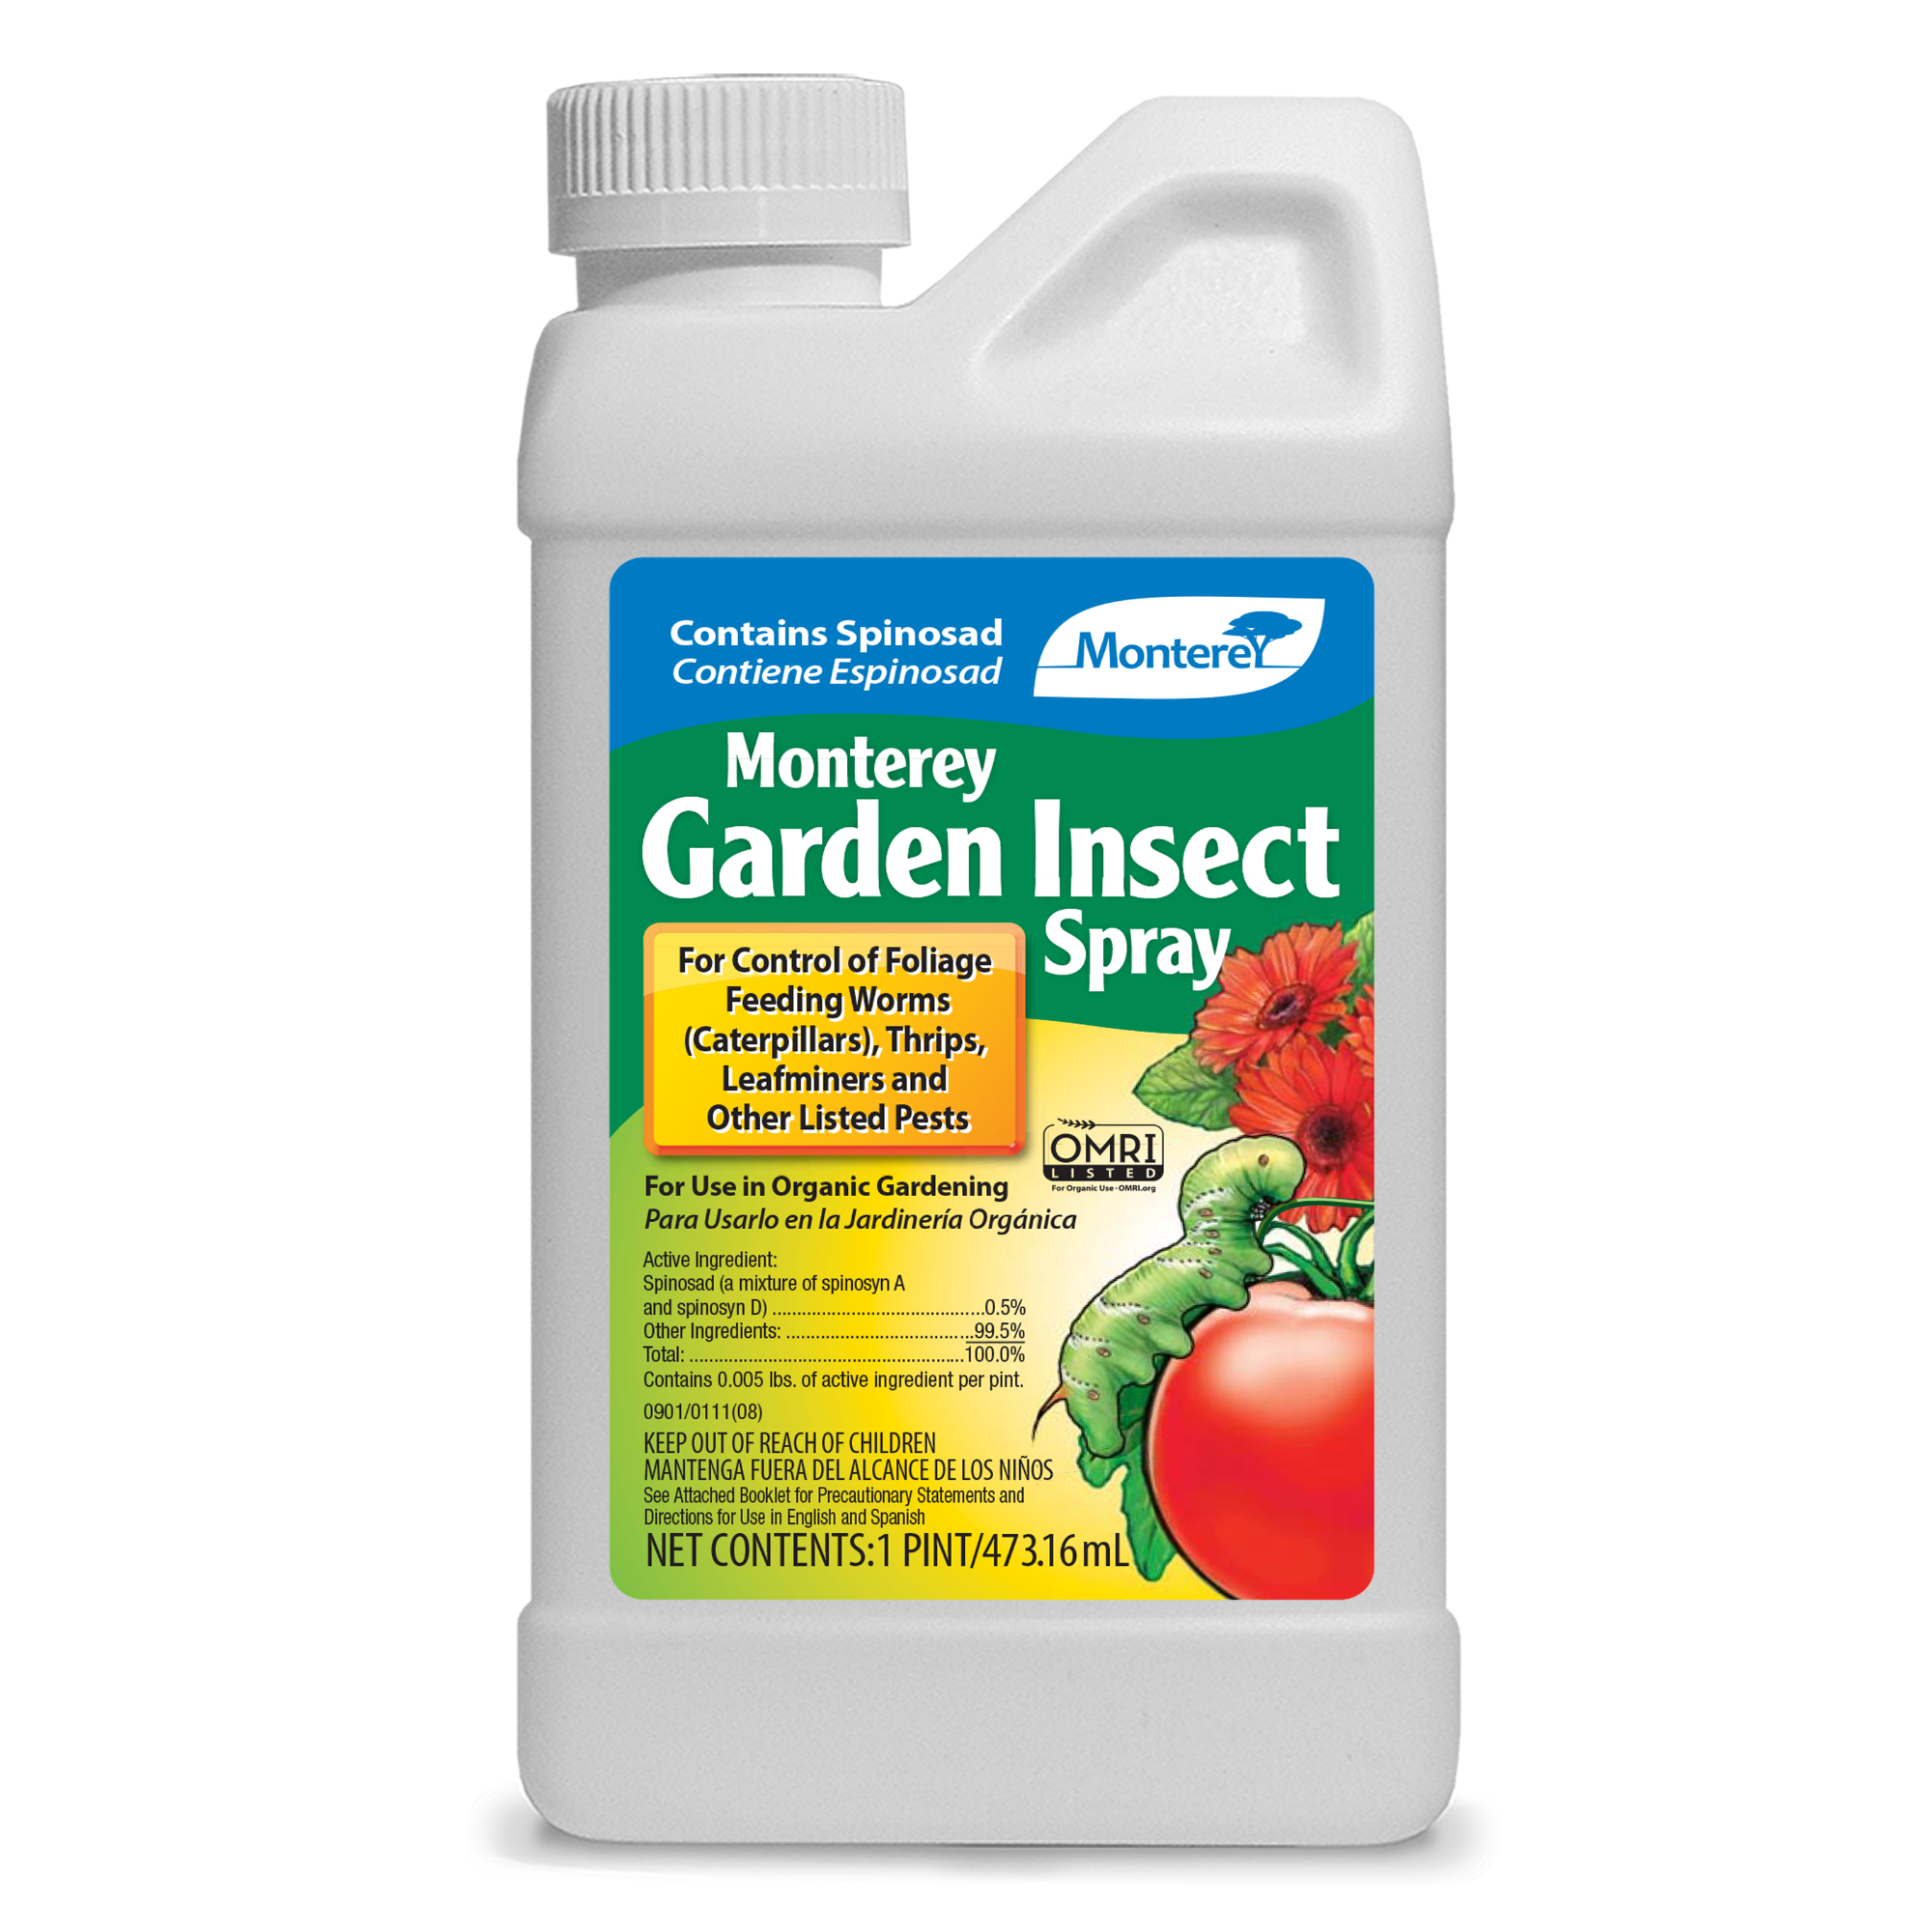 Monterey Garden Insect Spray Liquid Insecticide Concentrate Organic, 8 oz